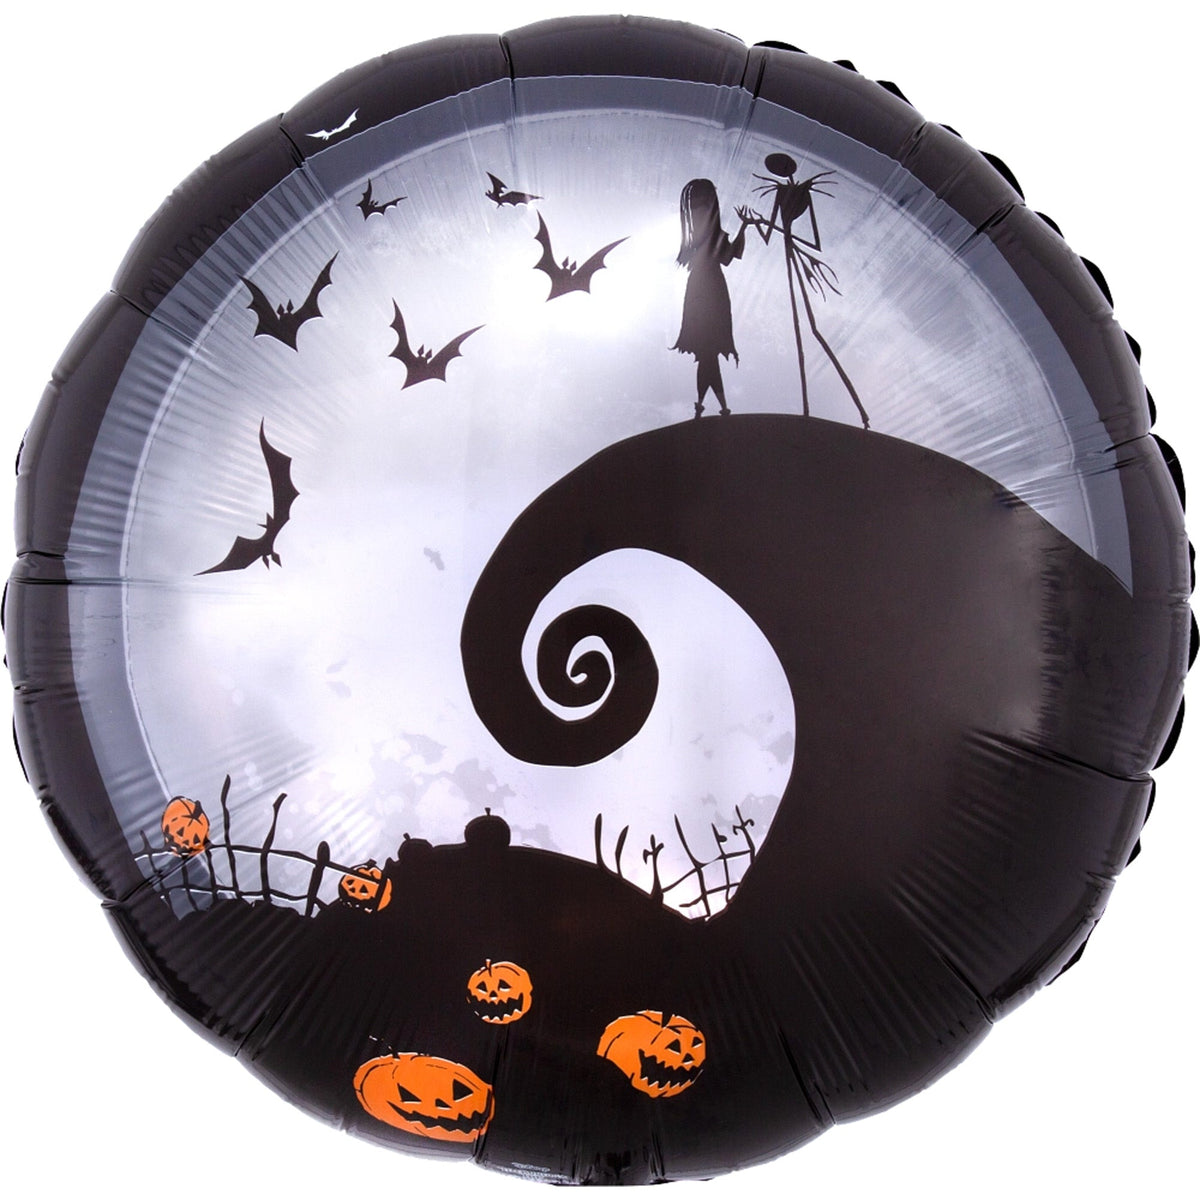 LE GROUPE BLC INTL INC Balloons The Nightmare Before Christmas Halloween Supershape Foil Balloon, 32 Inches 026635381680